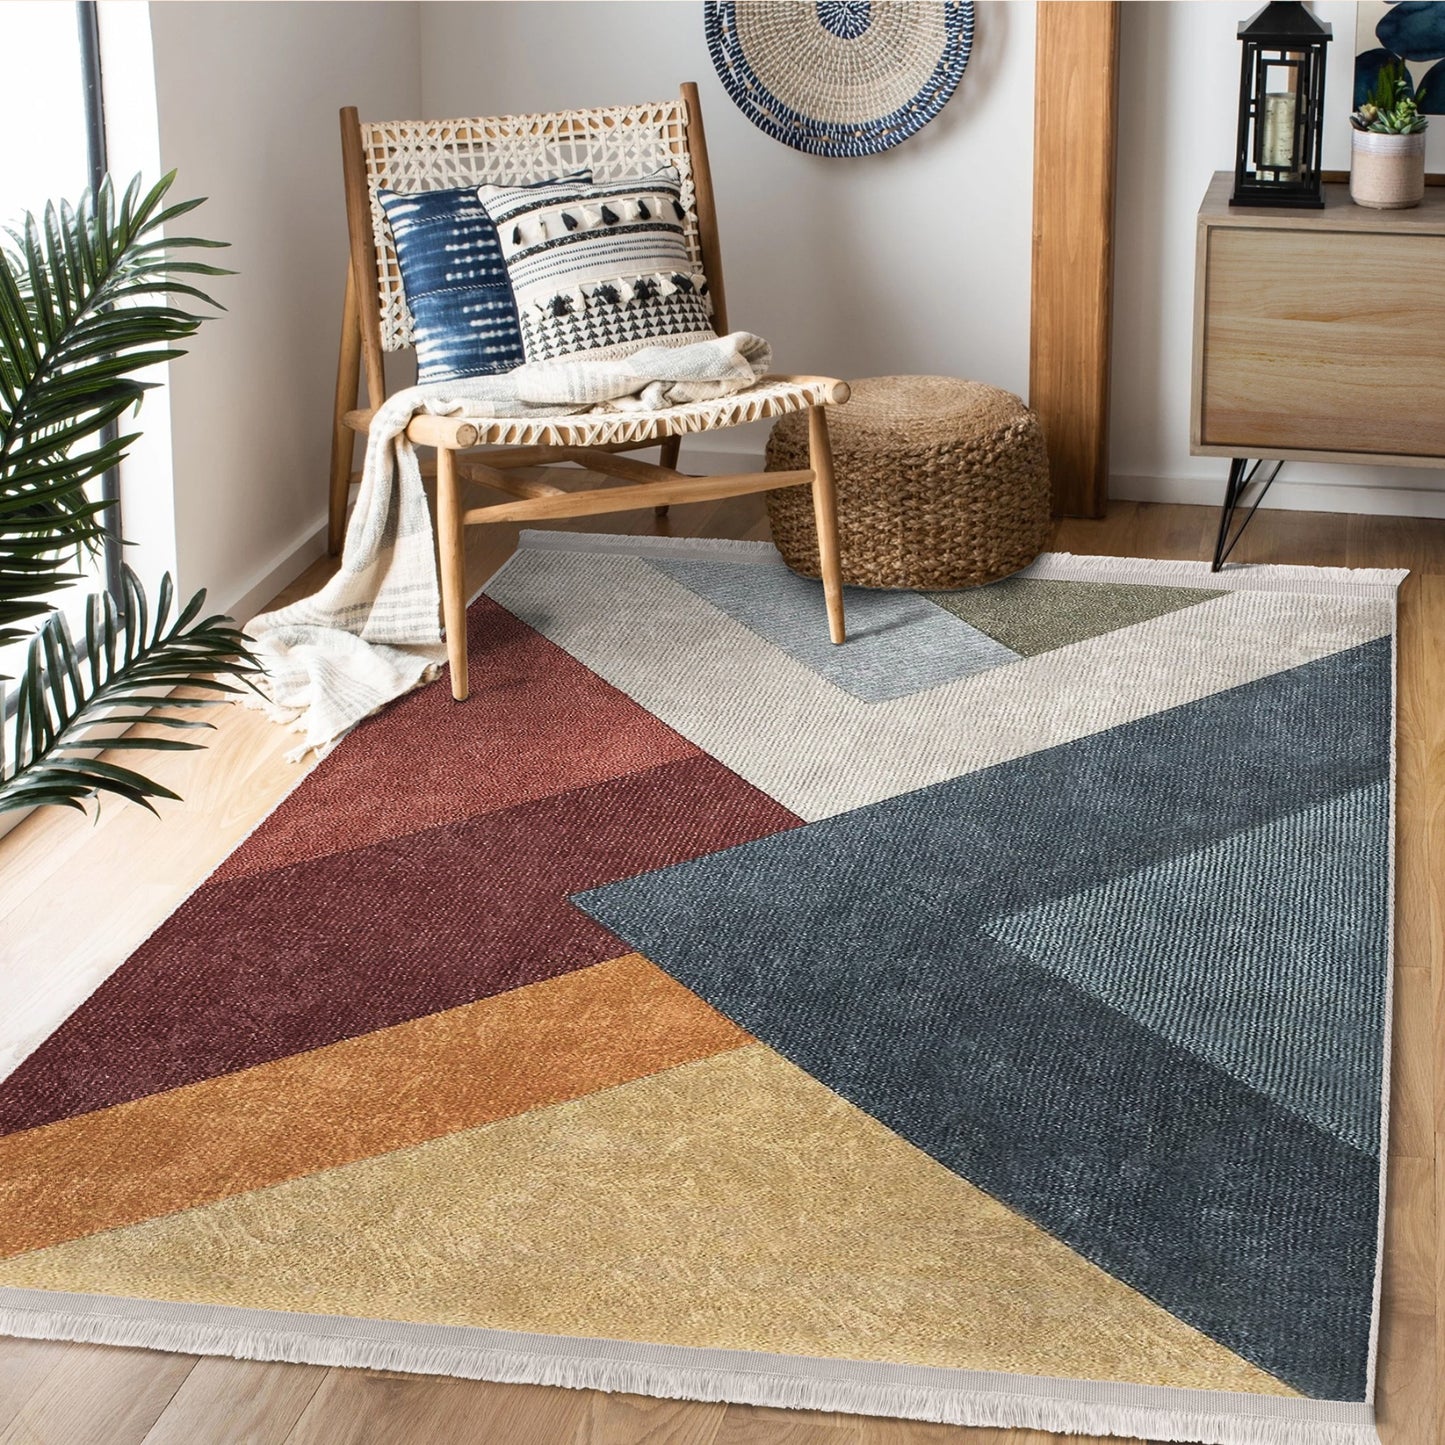 Decorative Area Rug with a Stylish Blend of Triangle Patterns